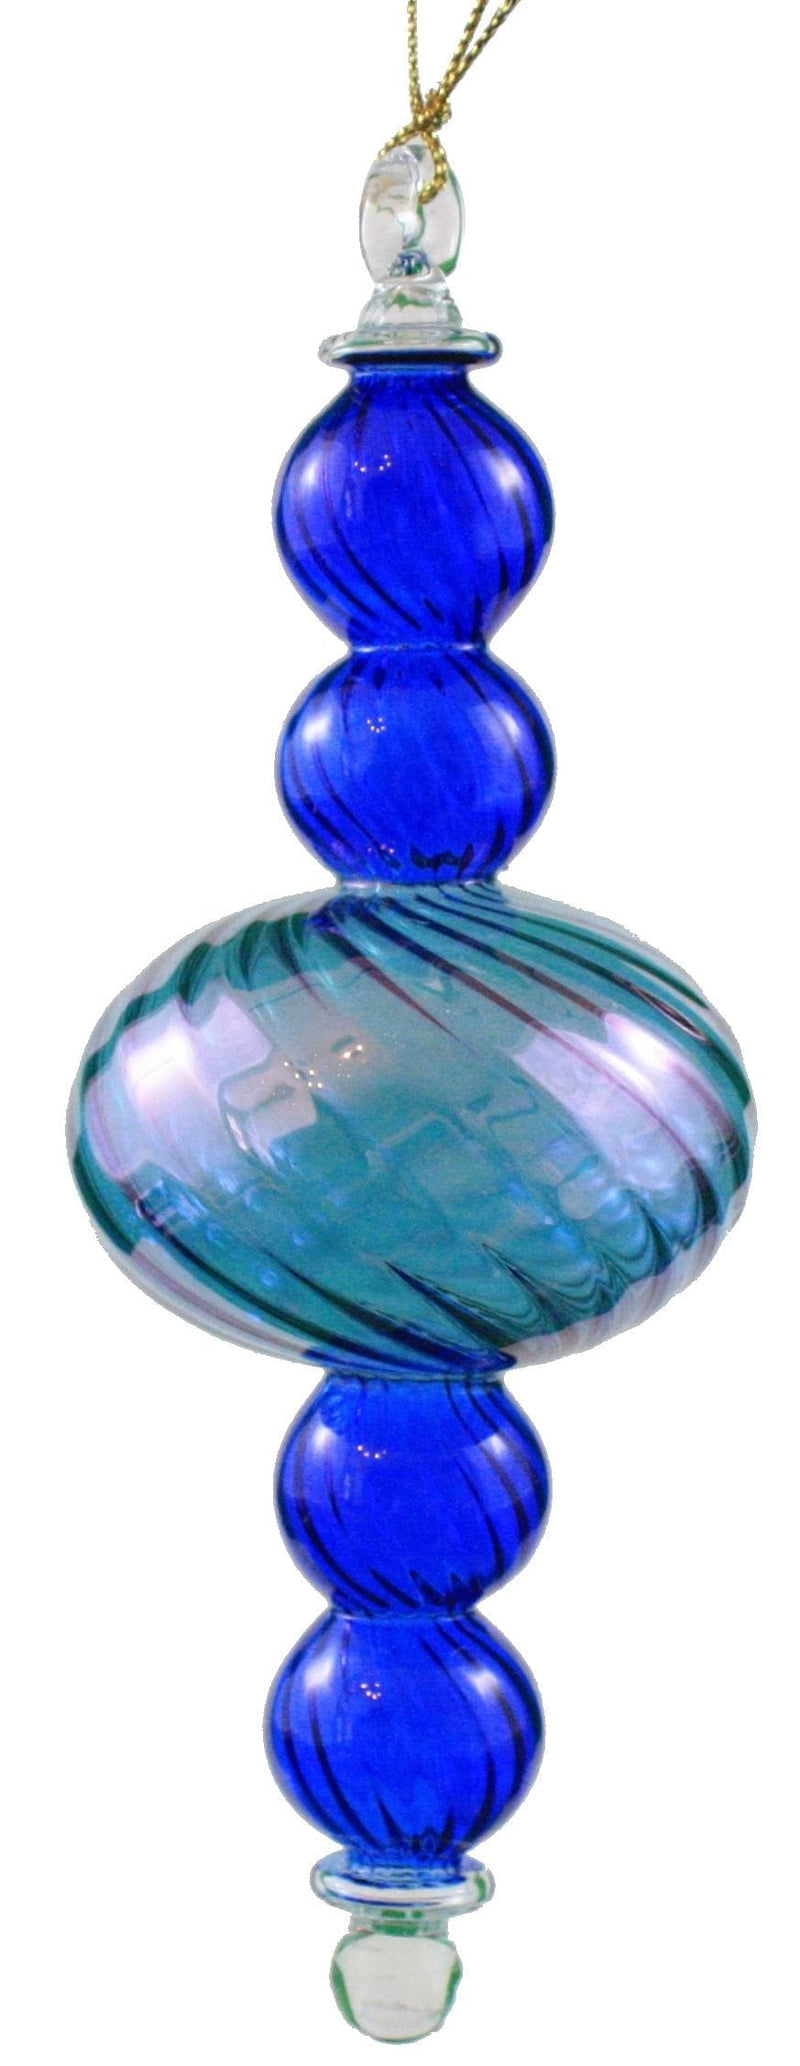 Midsize Organic Luster 5 Section Globe -  Blue - Shelburne Country Store